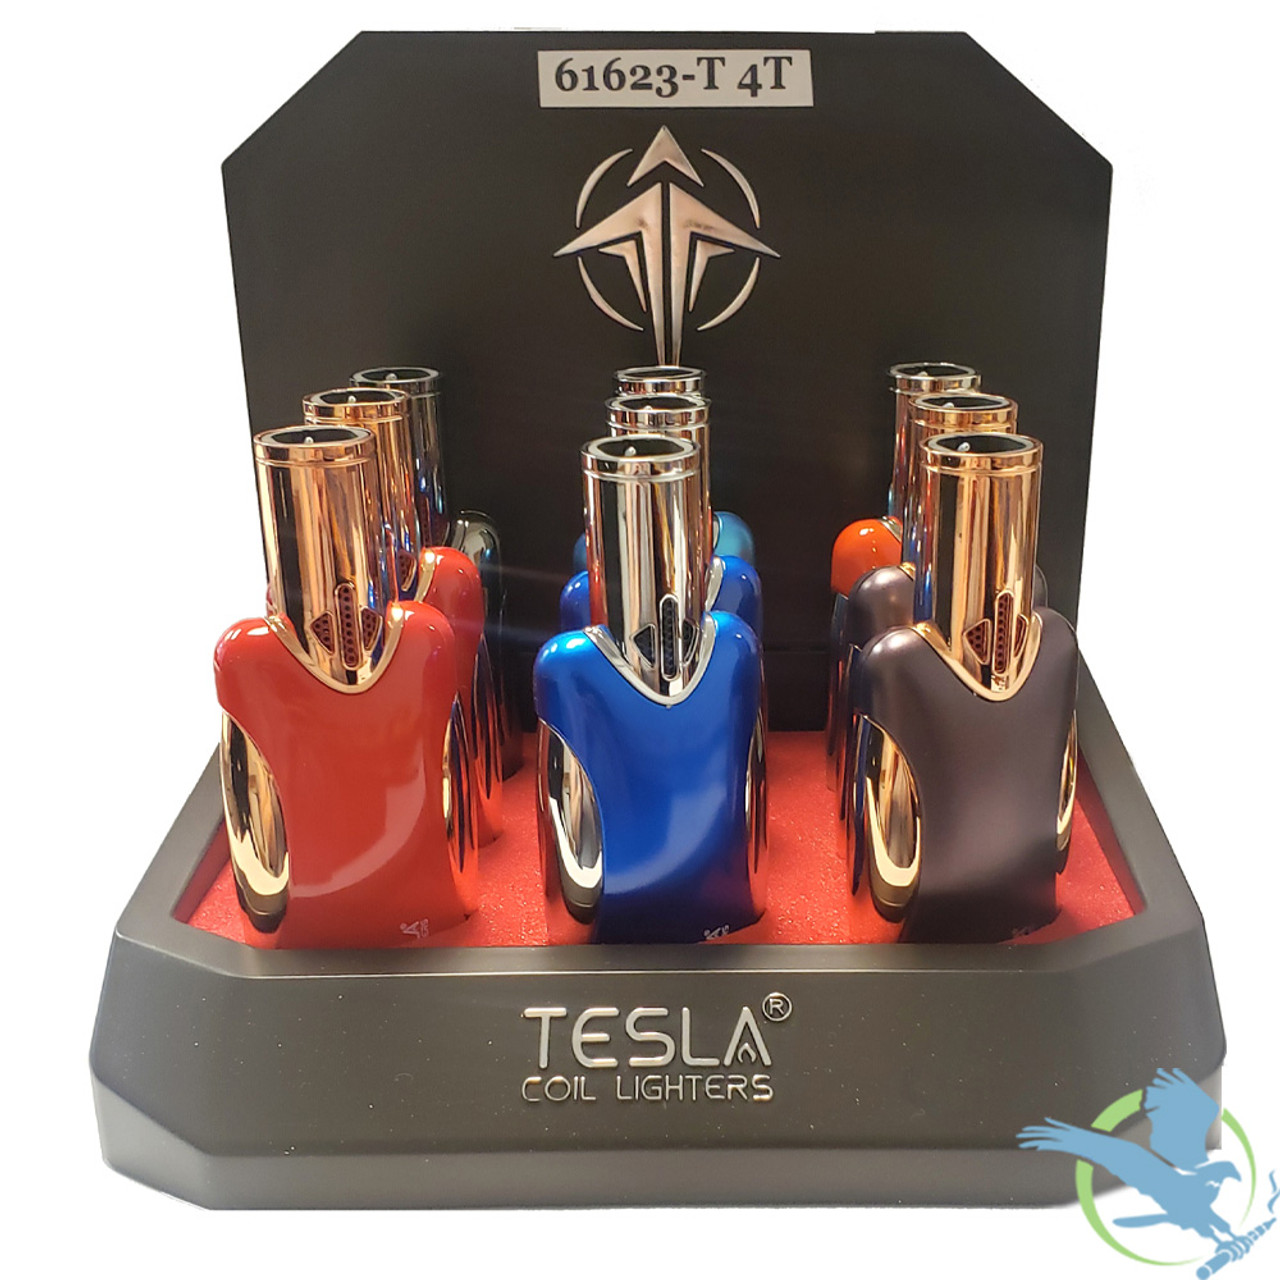 https://cdn11.bigcommerce.com/s-964anr/images/stencil/1280x1280/products/20024/98620/Tesla-Coil-Lighters-4Torch-Straight-Shooter-Neon-Quad-Flame-Adjustable-Butane-Torch-Lighter---Assorted-Colors---Display-of-9-61623-T__84428.1645554125.jpg?c=2